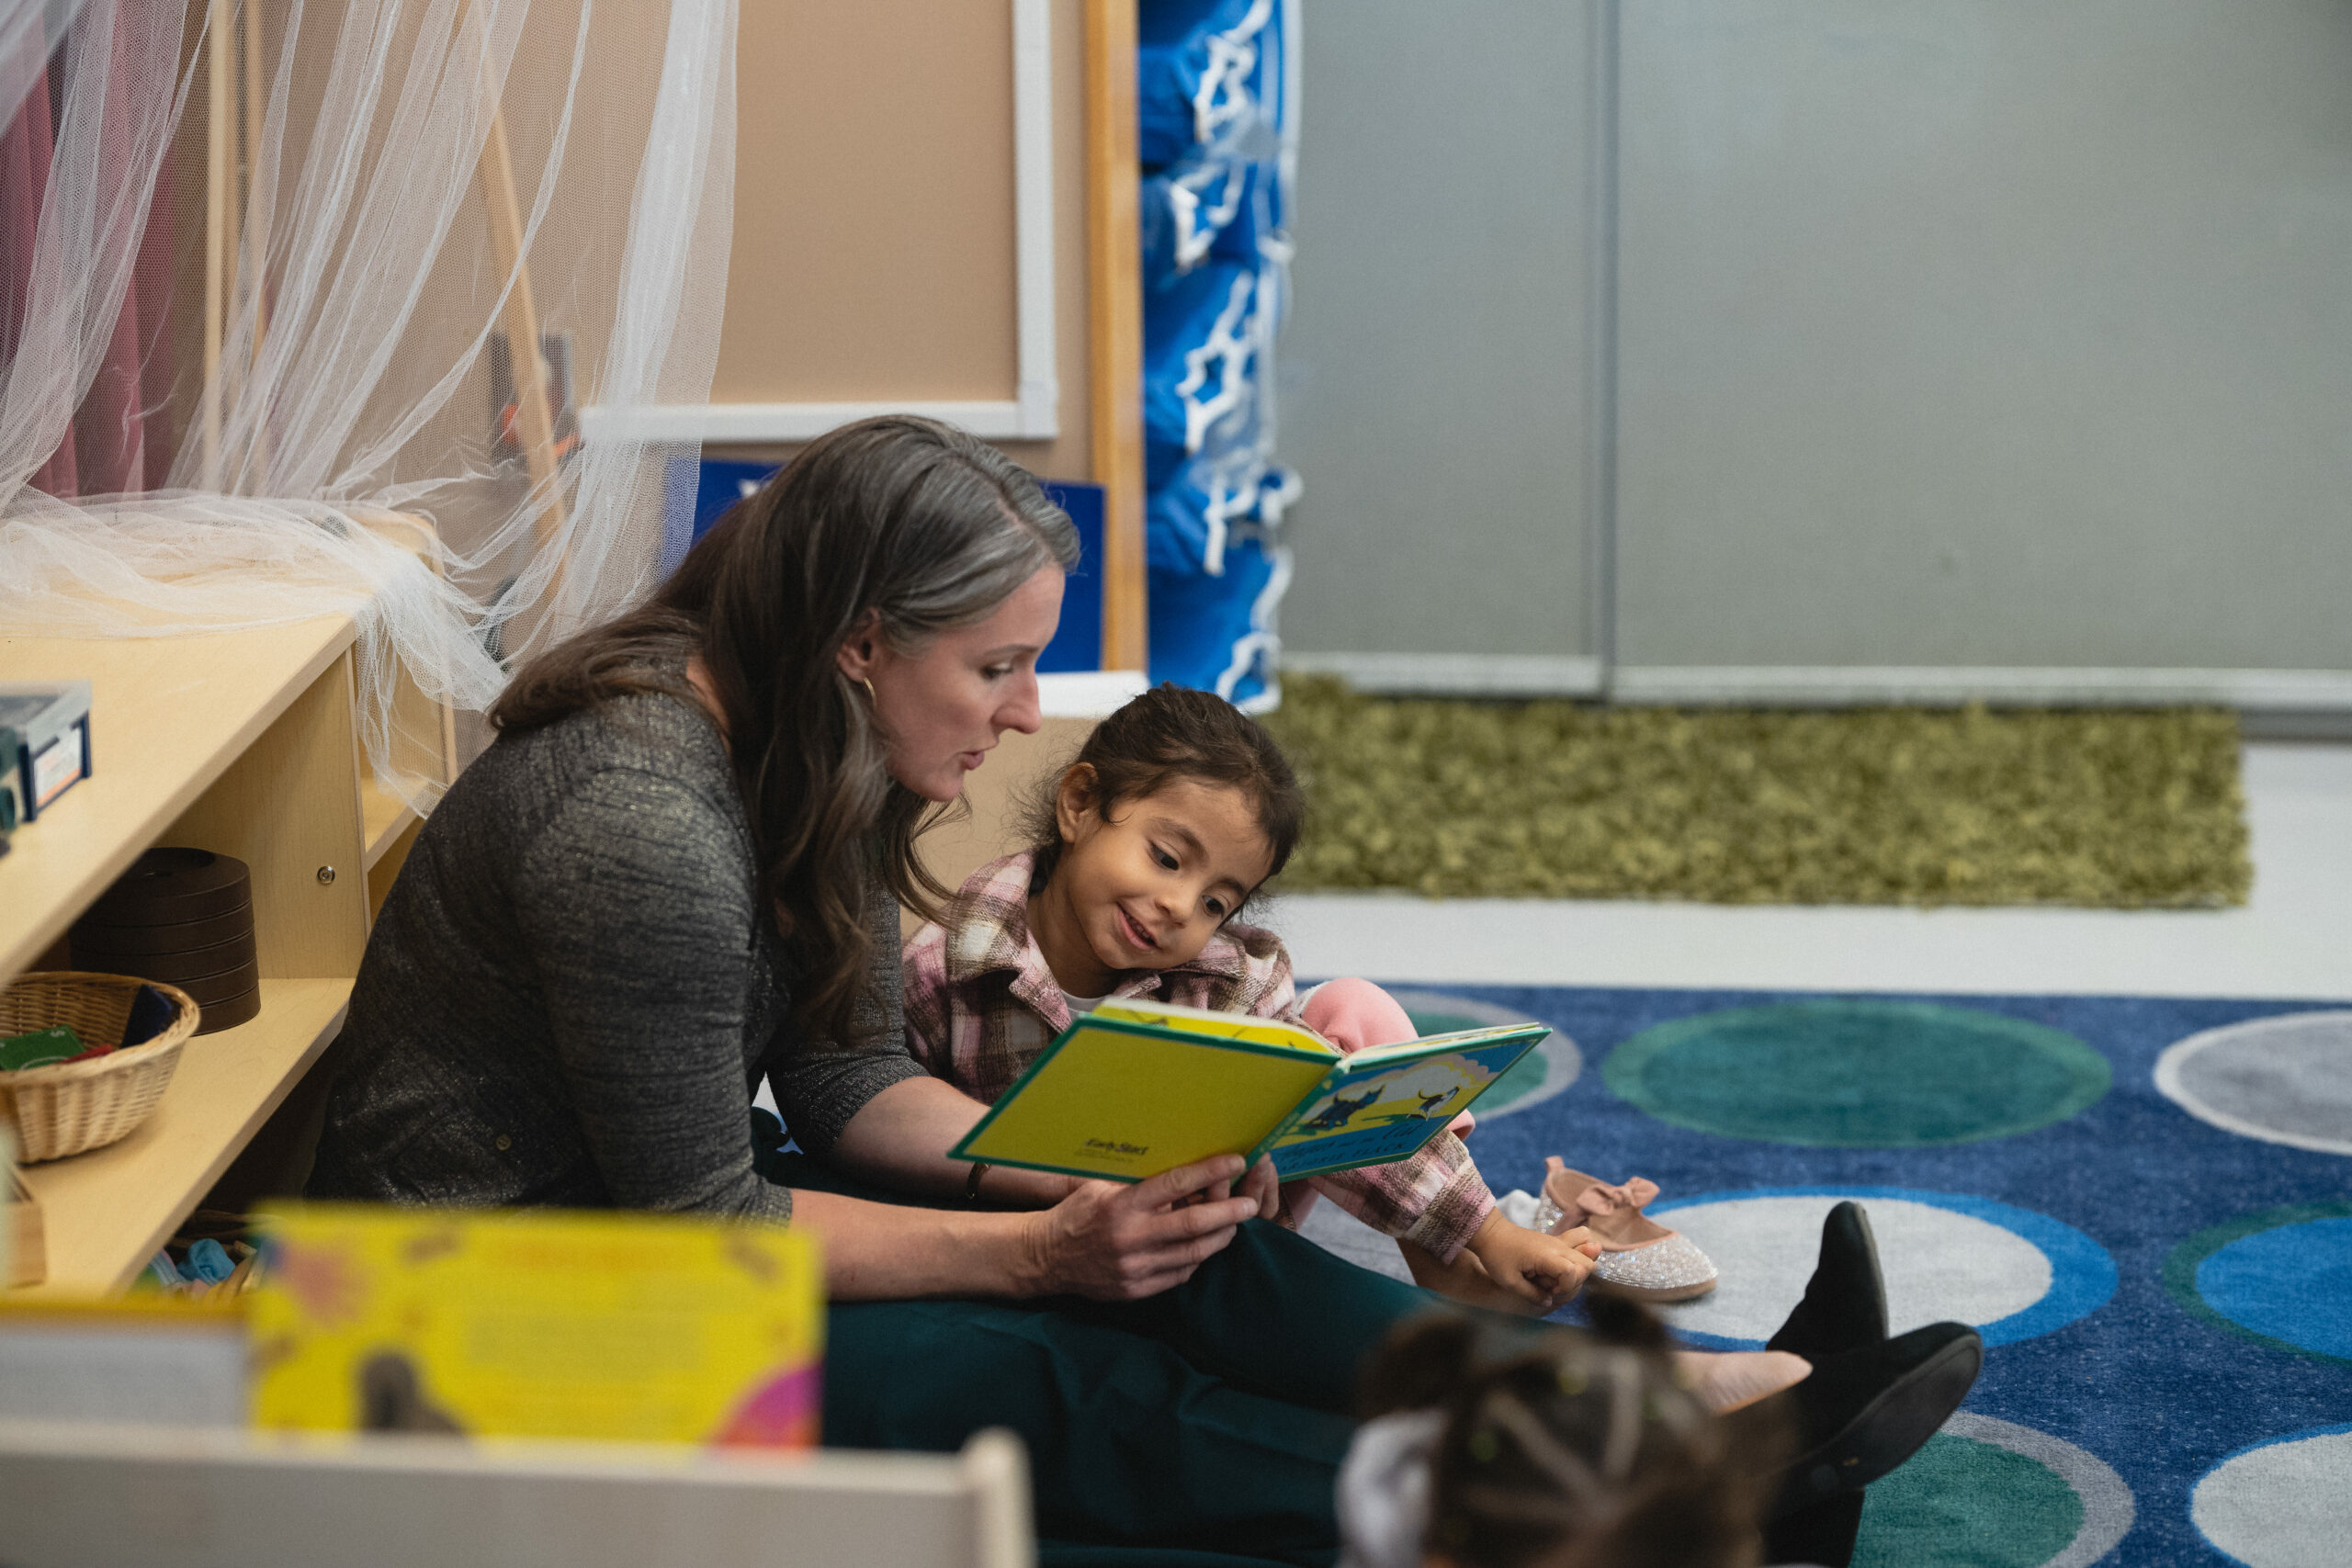 Adult reads smiling child a story on a rug in a classroom